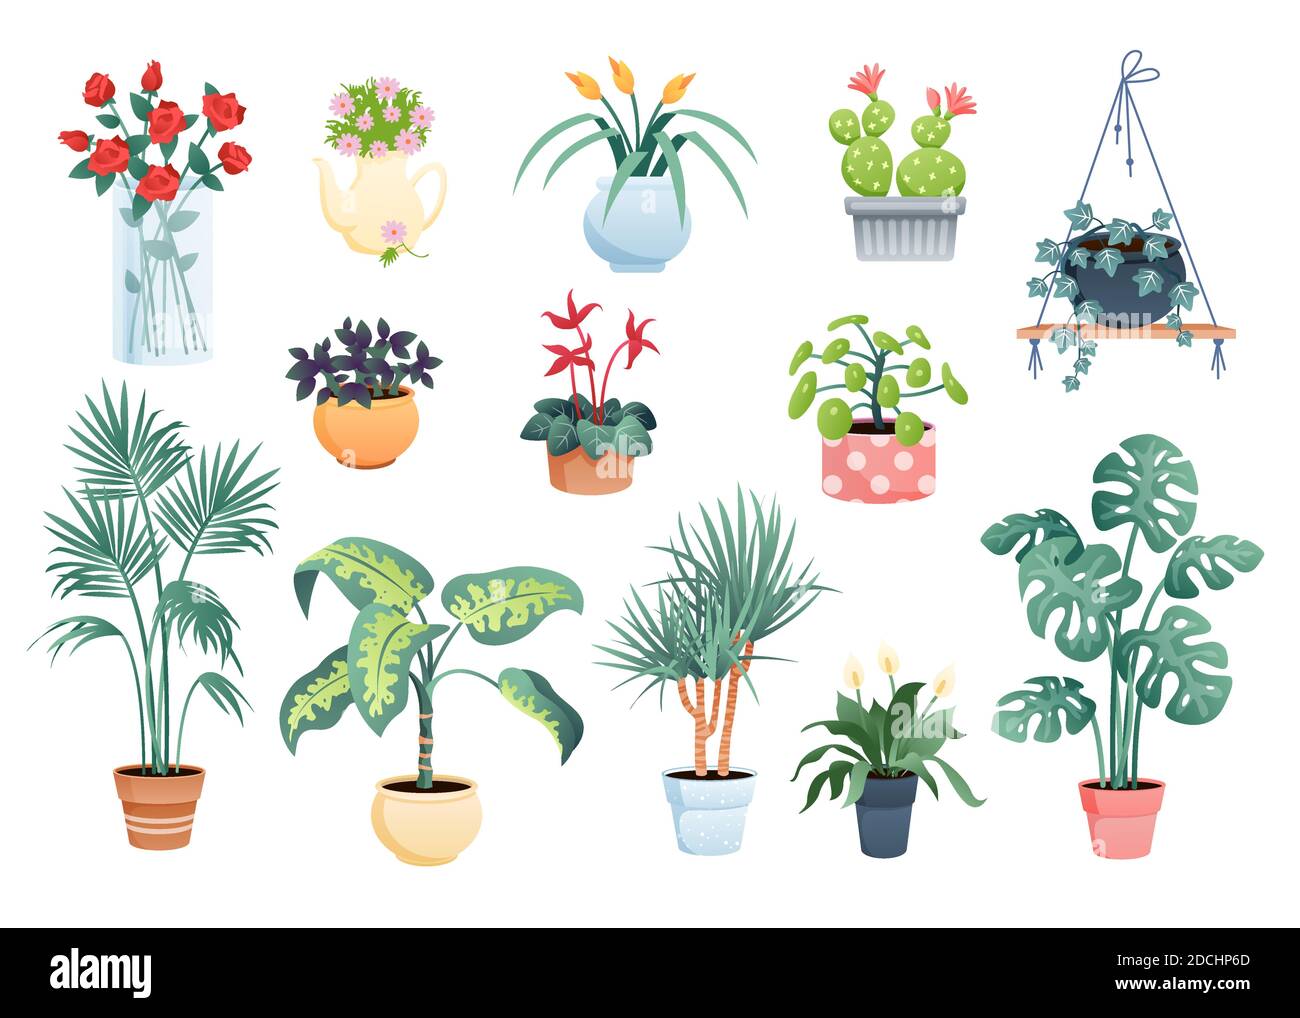 House plants home decor vector illustration set, cartoon flat potted plants and flowers collection of houseplants isolated on white Stock Vector